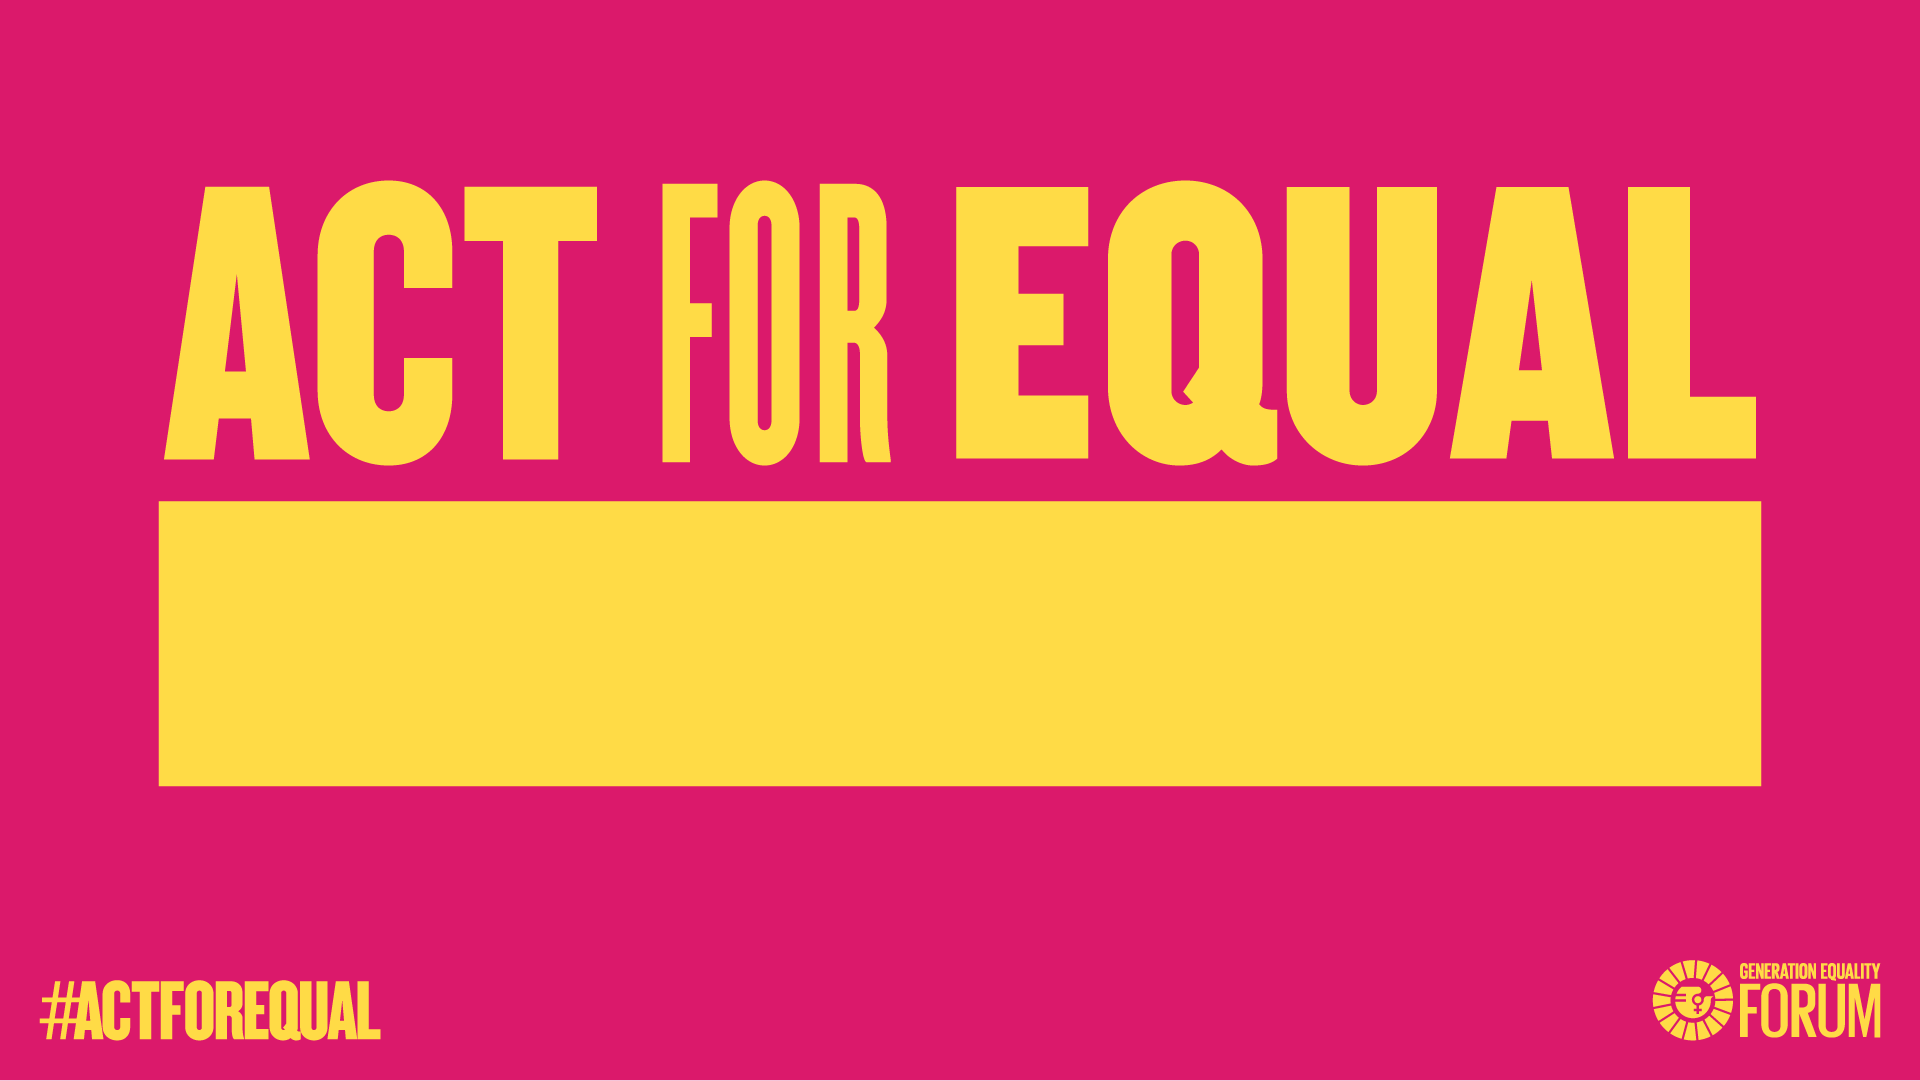 Act for Equal  Generation Equality Forum